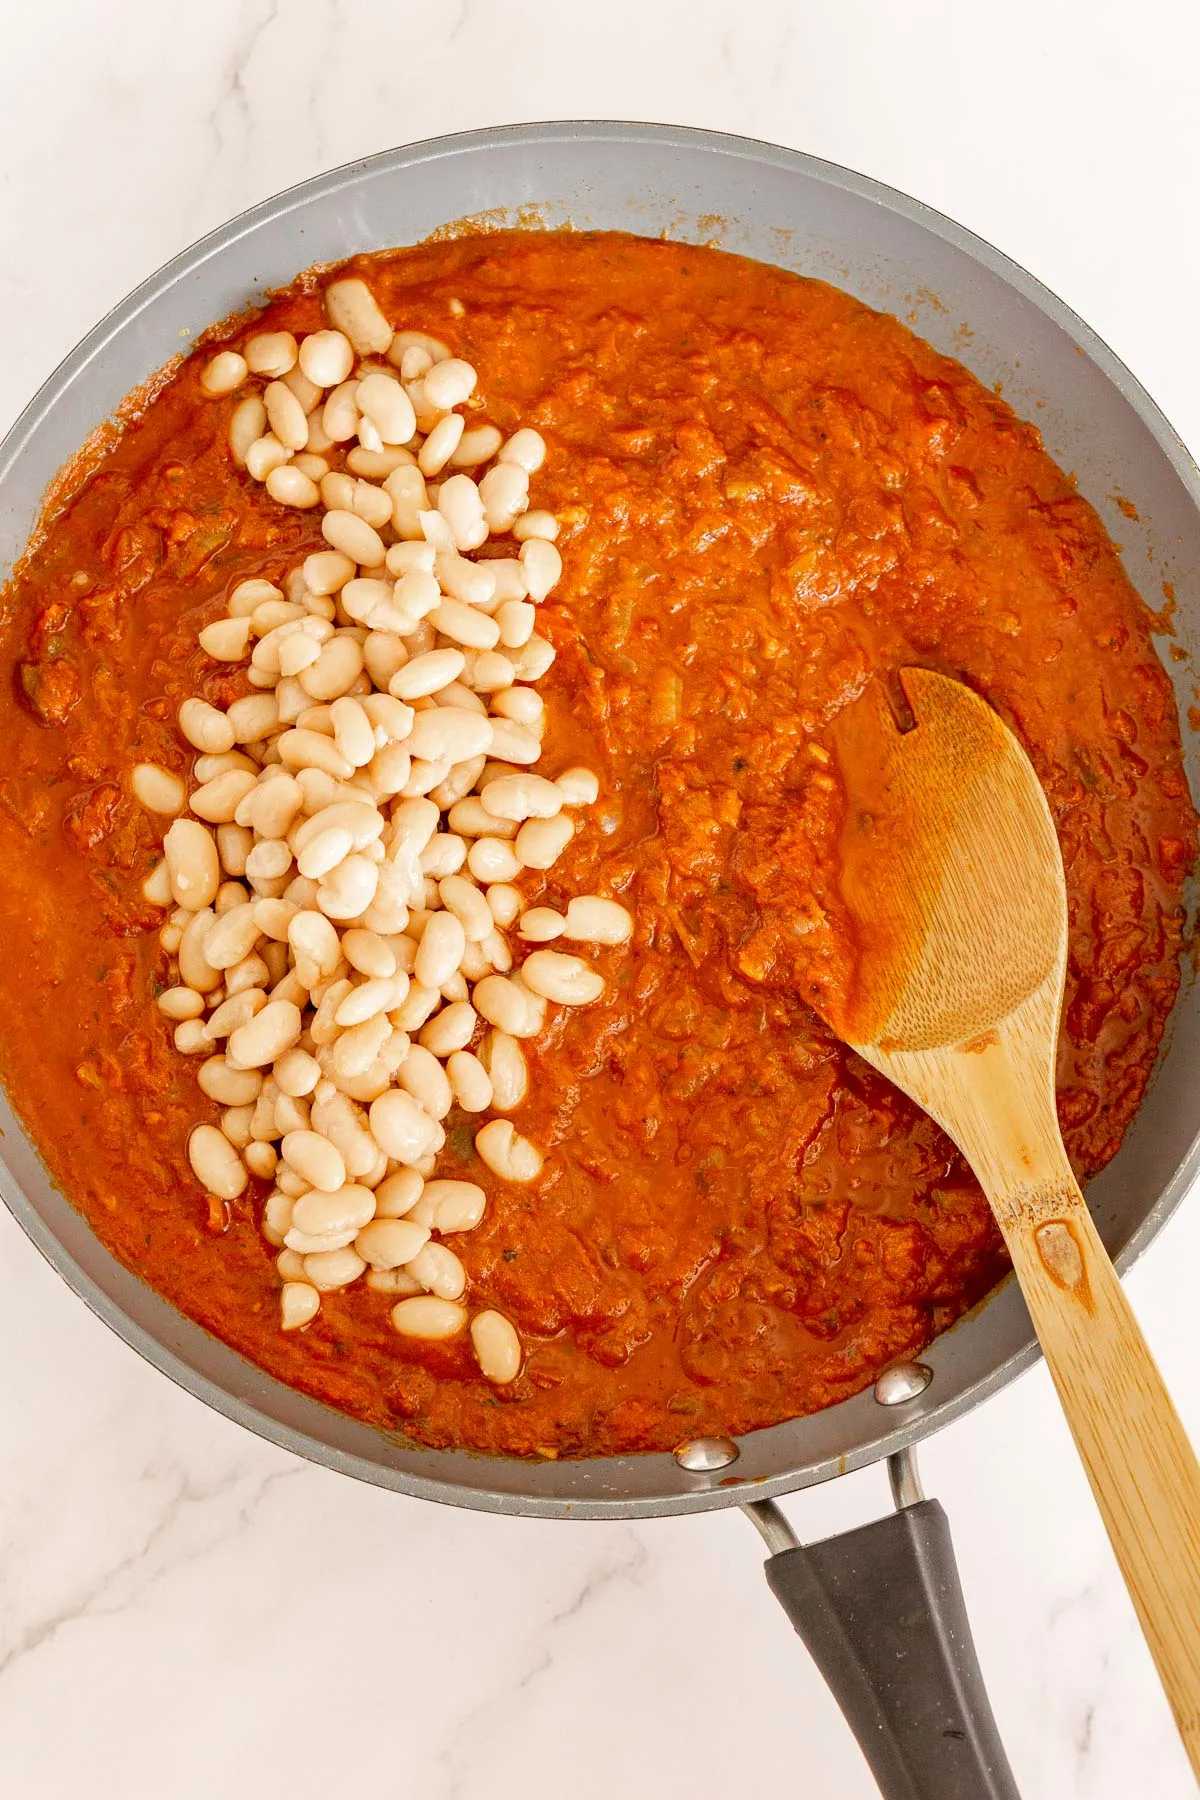 Spiced tomato sauce with white beans in a pan.